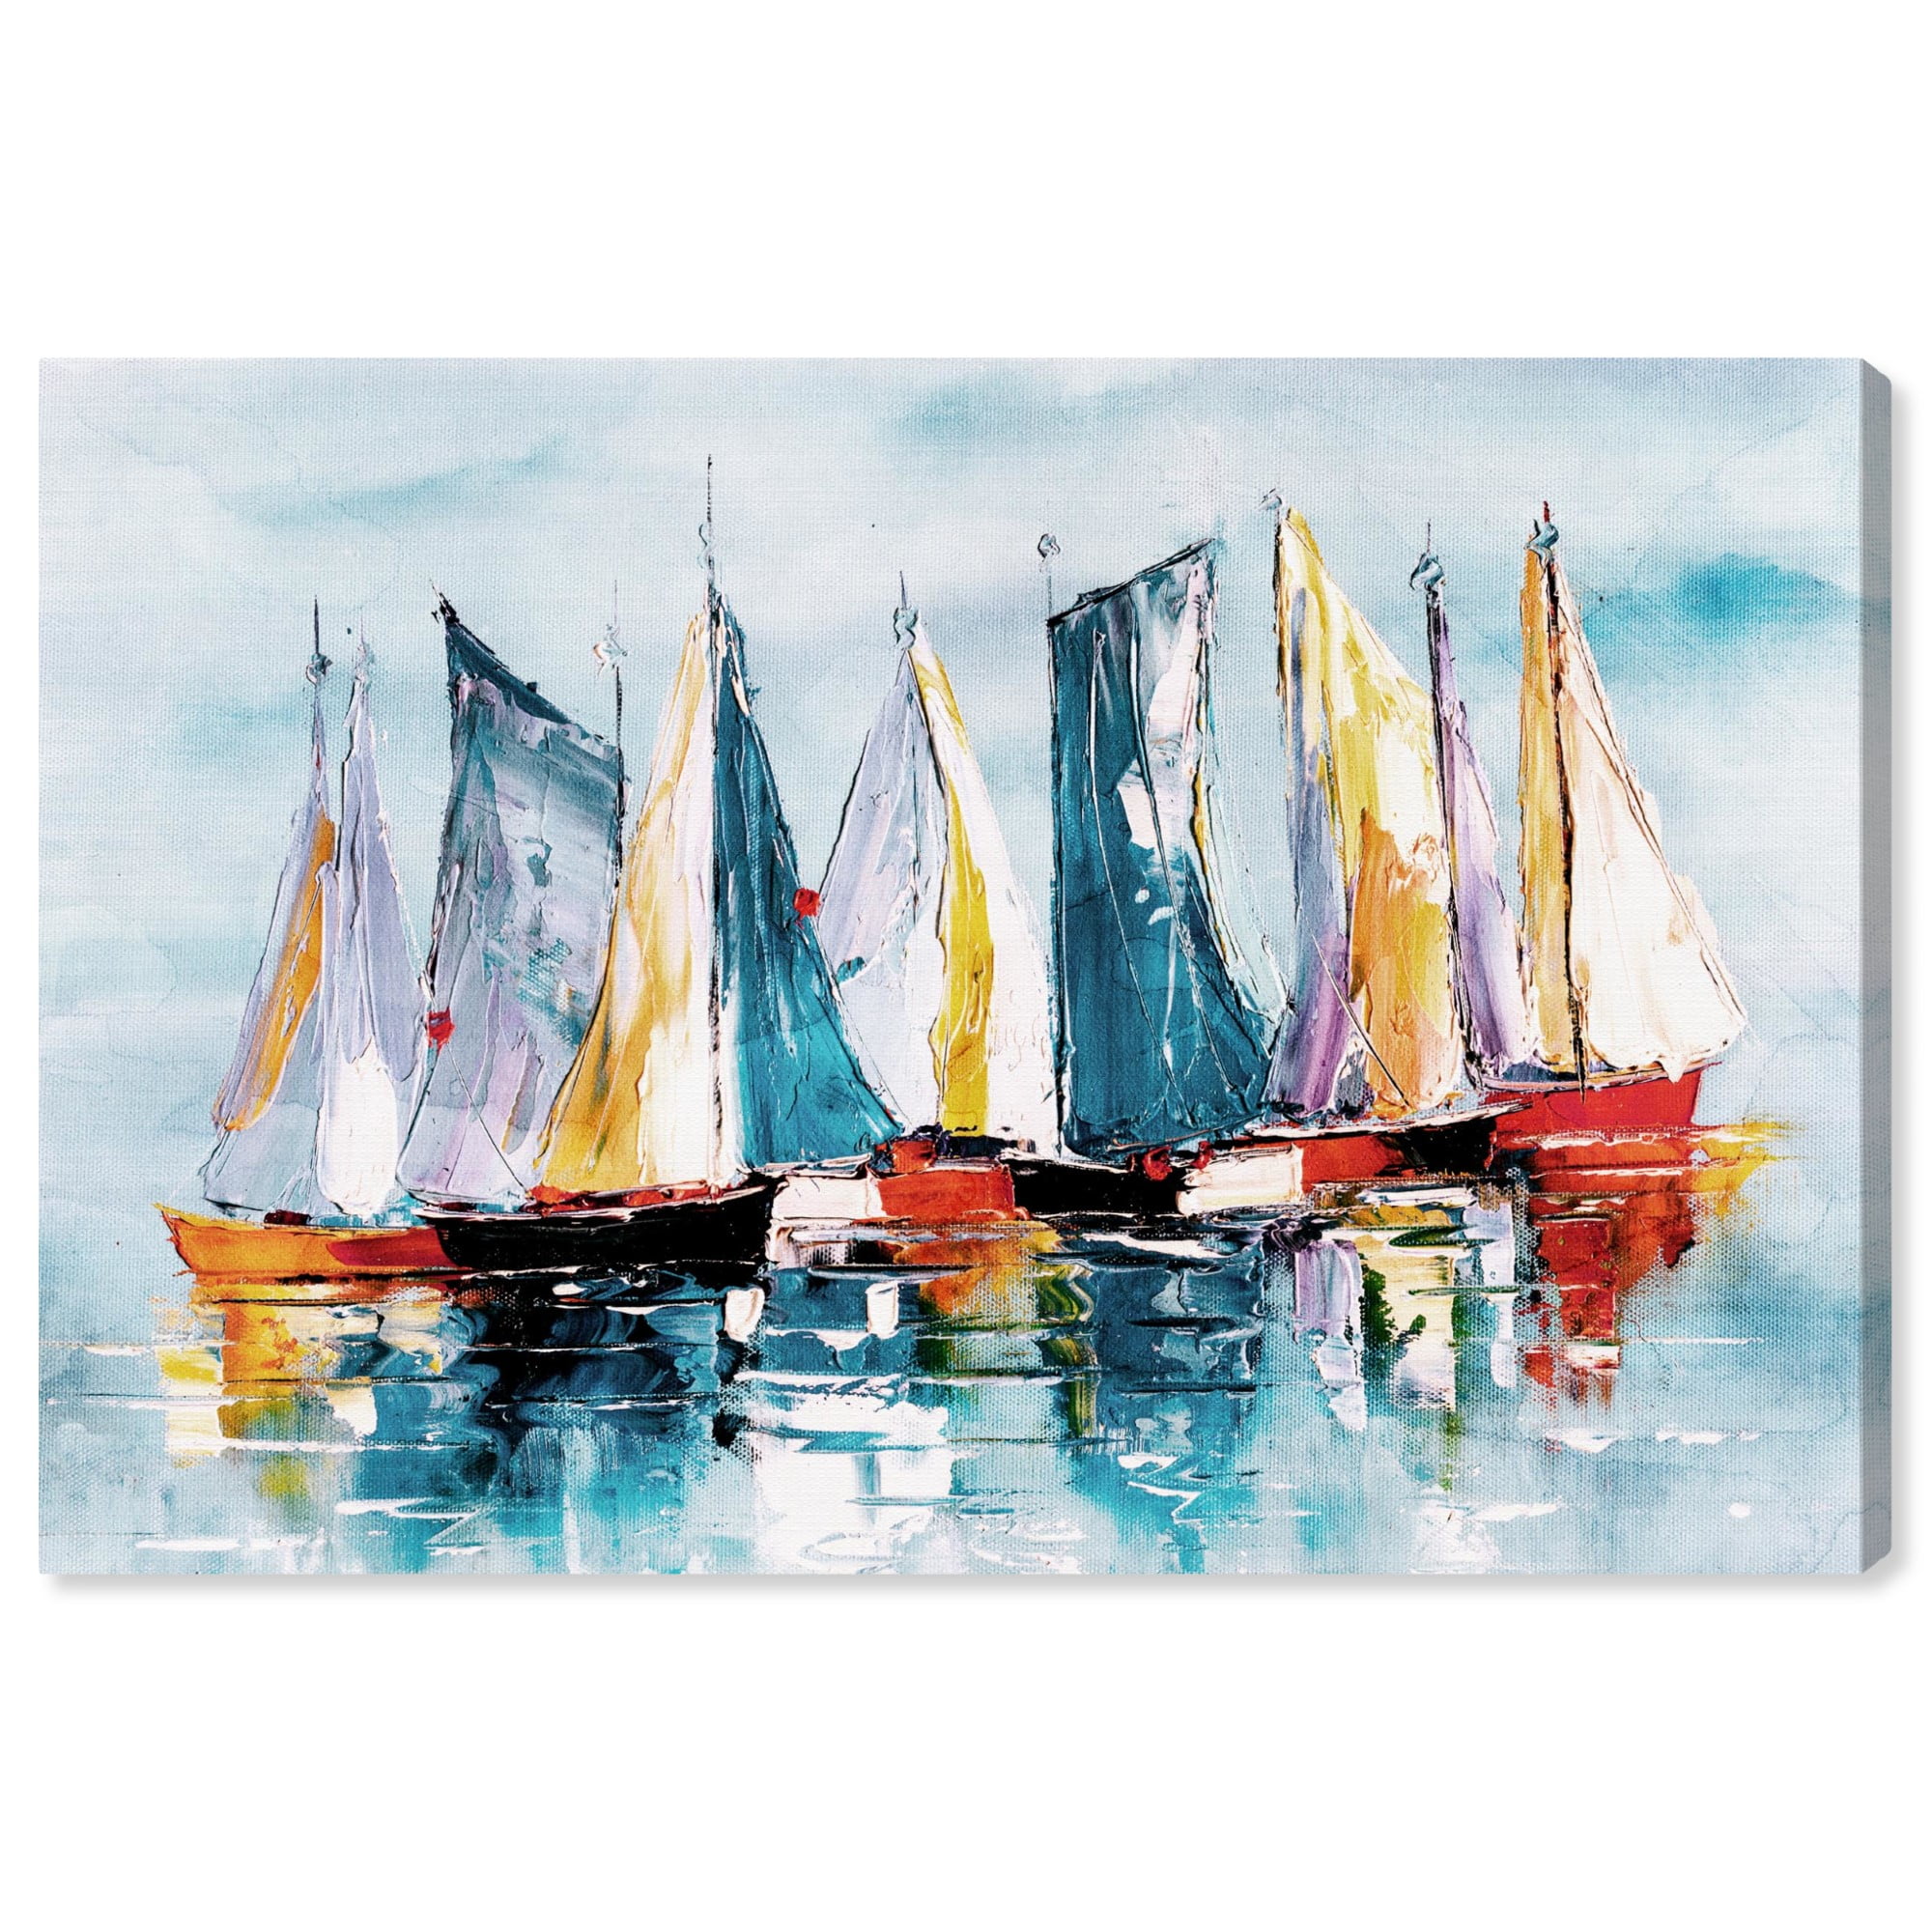 BOAT WATER PAINTING PATTERN PRINT CANVAS WALL ART PICTURE LARGE WS44 MATAGA .